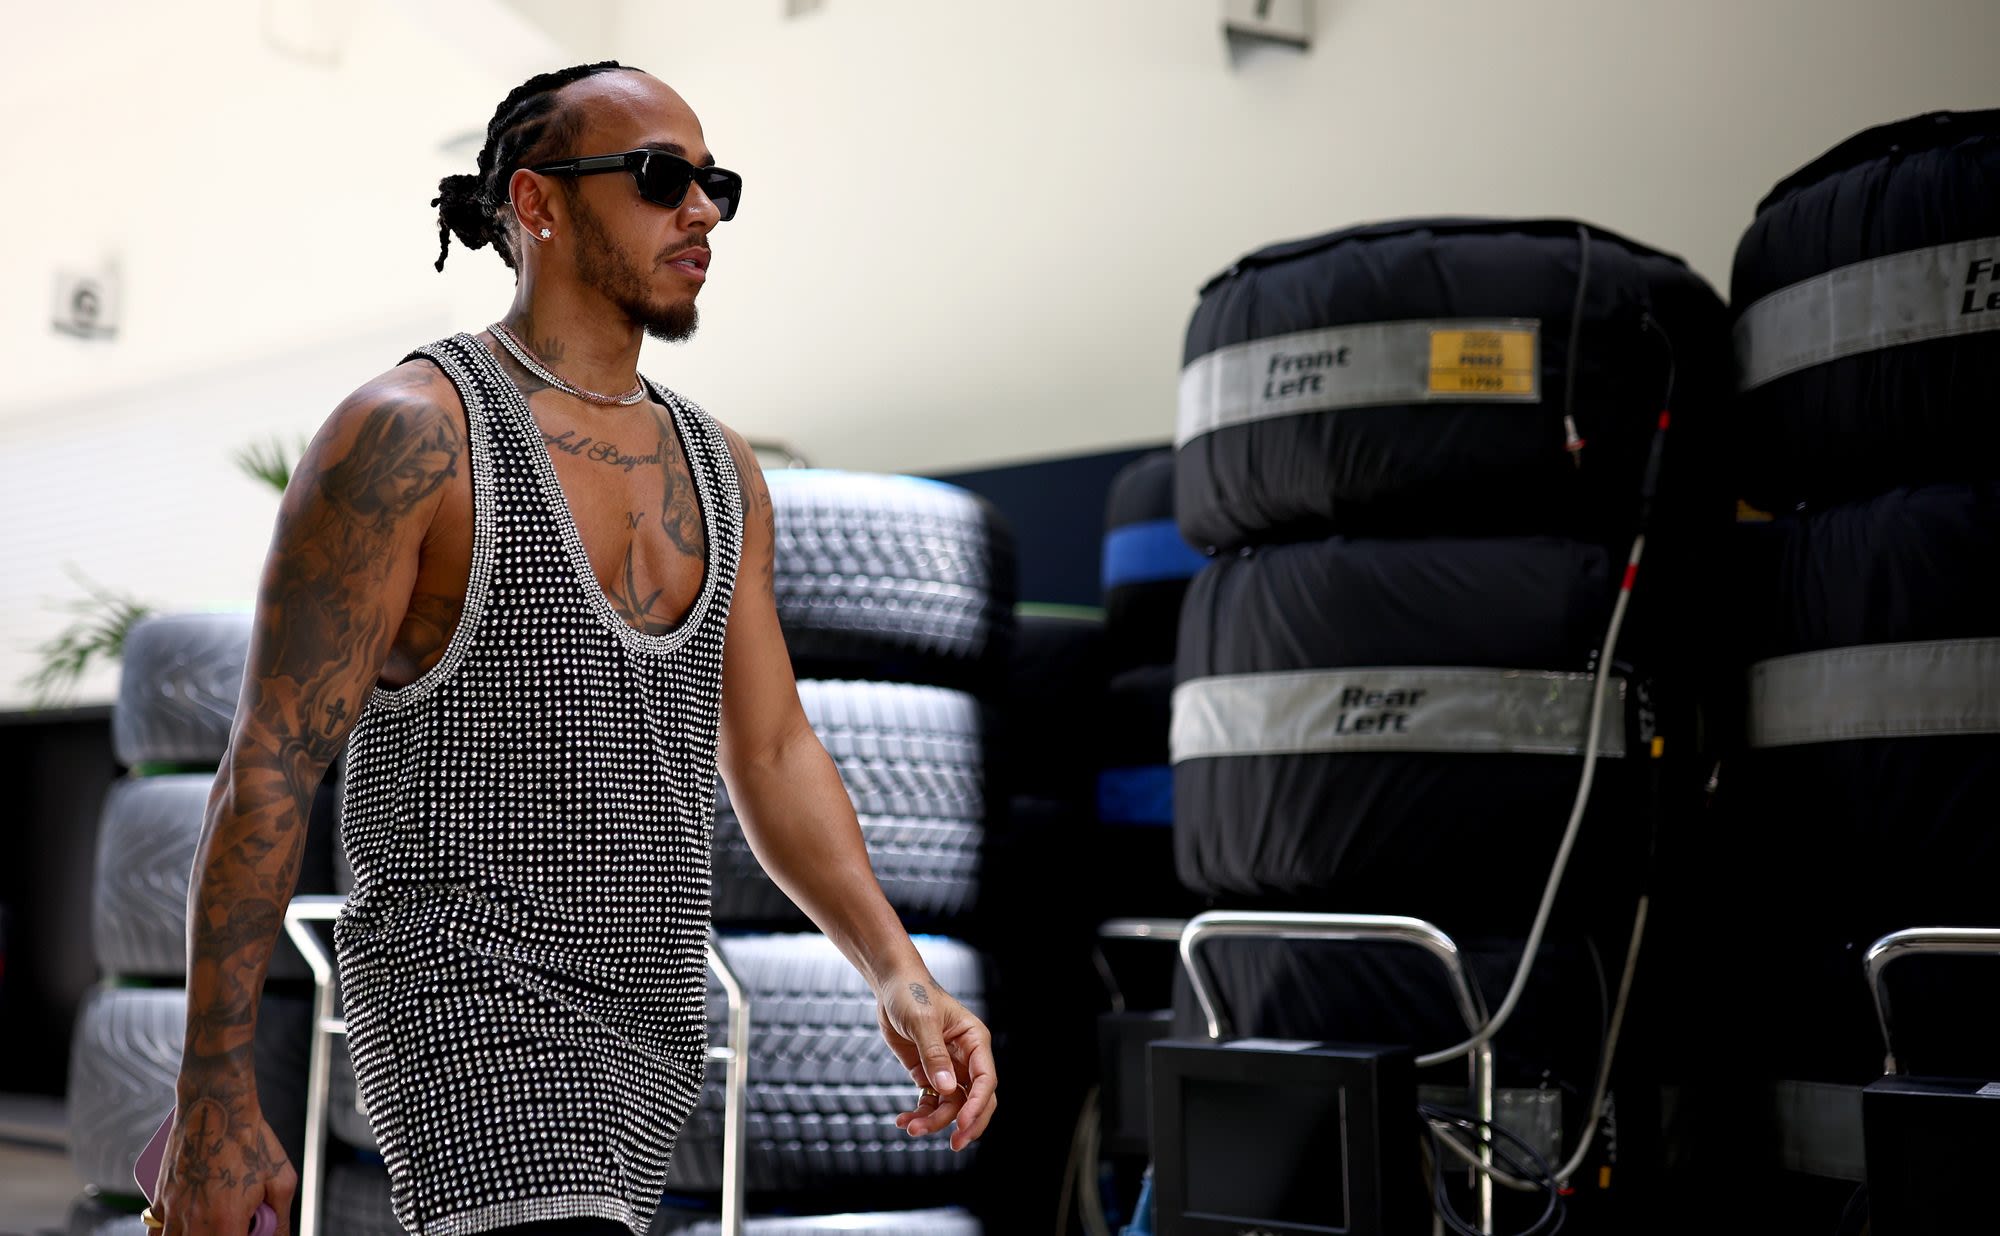 ... During the F1 Miami Grand Prix Weekend: Lewis Hamilton in Marc Jacobs, Kendall Jenner in Tommy Hilfiger and More